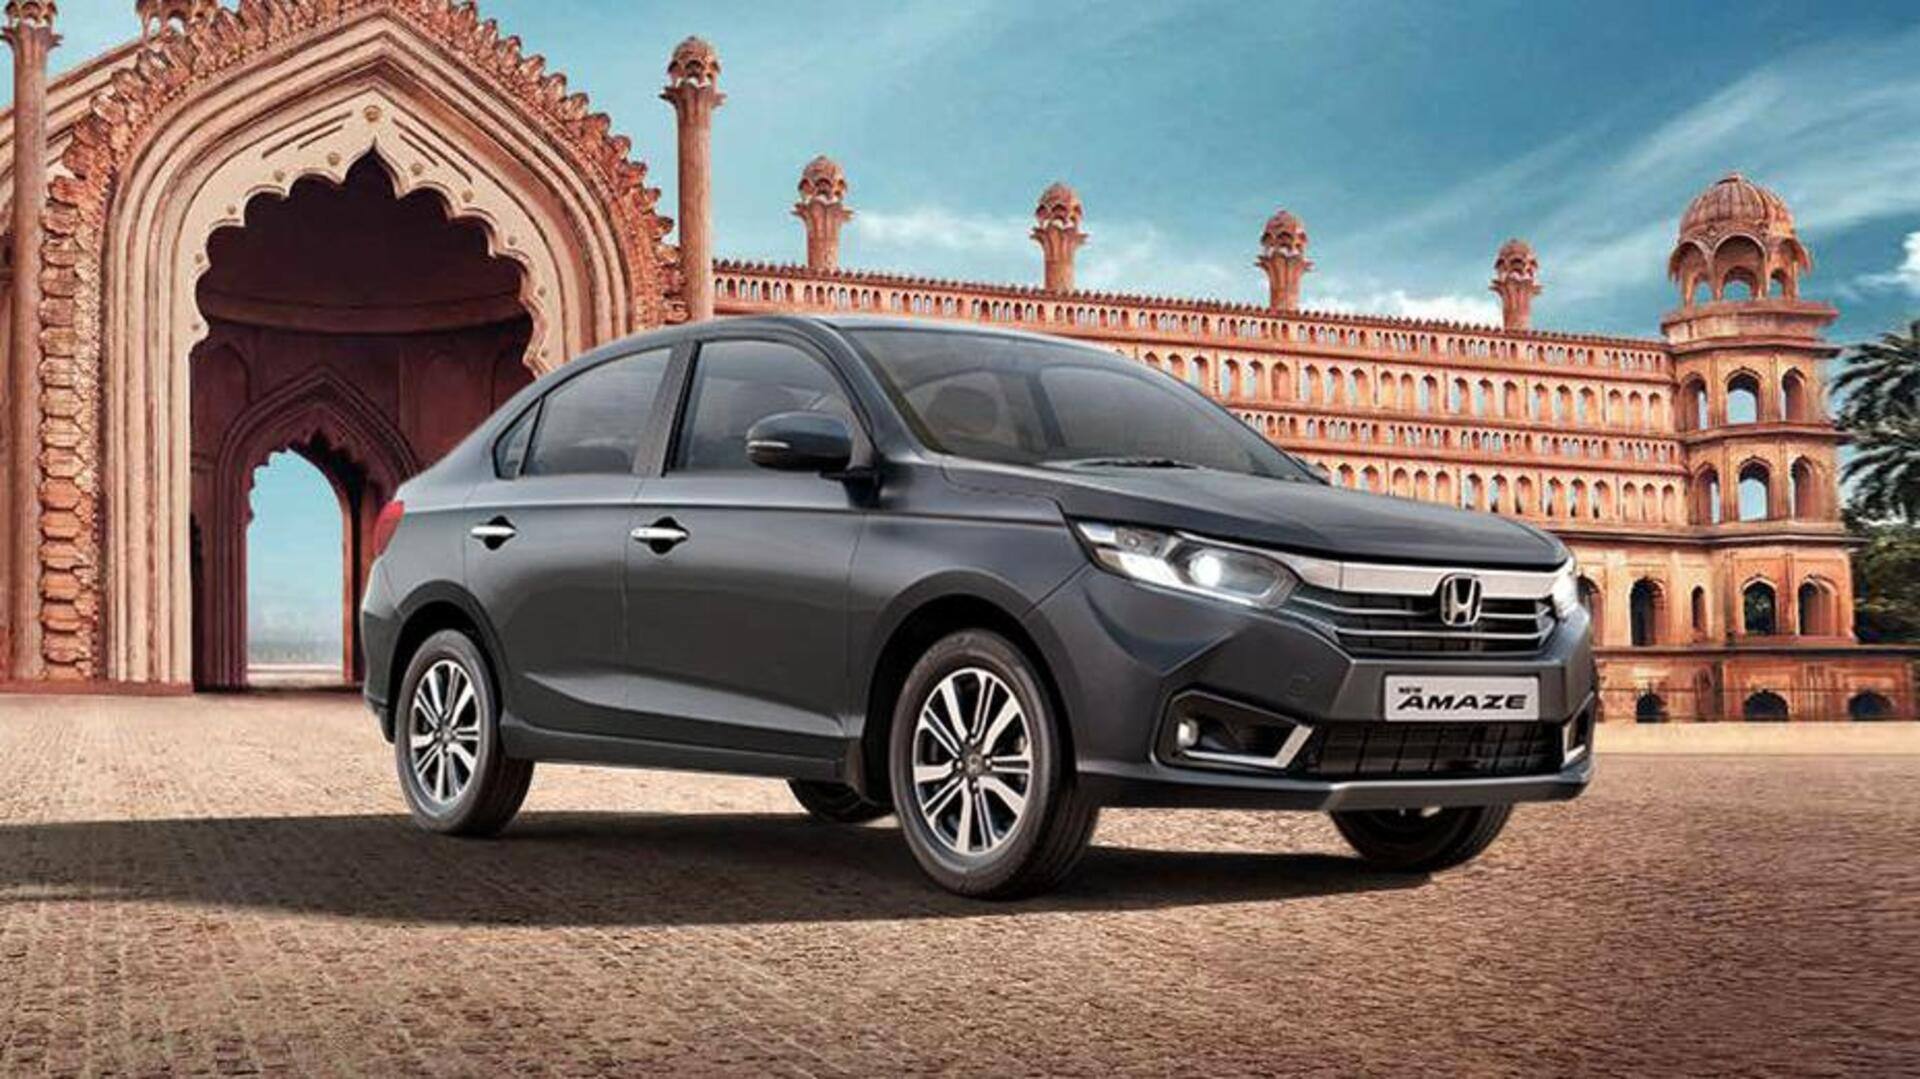 Up to Rs. 90,000 off this Diwali on popular sedans